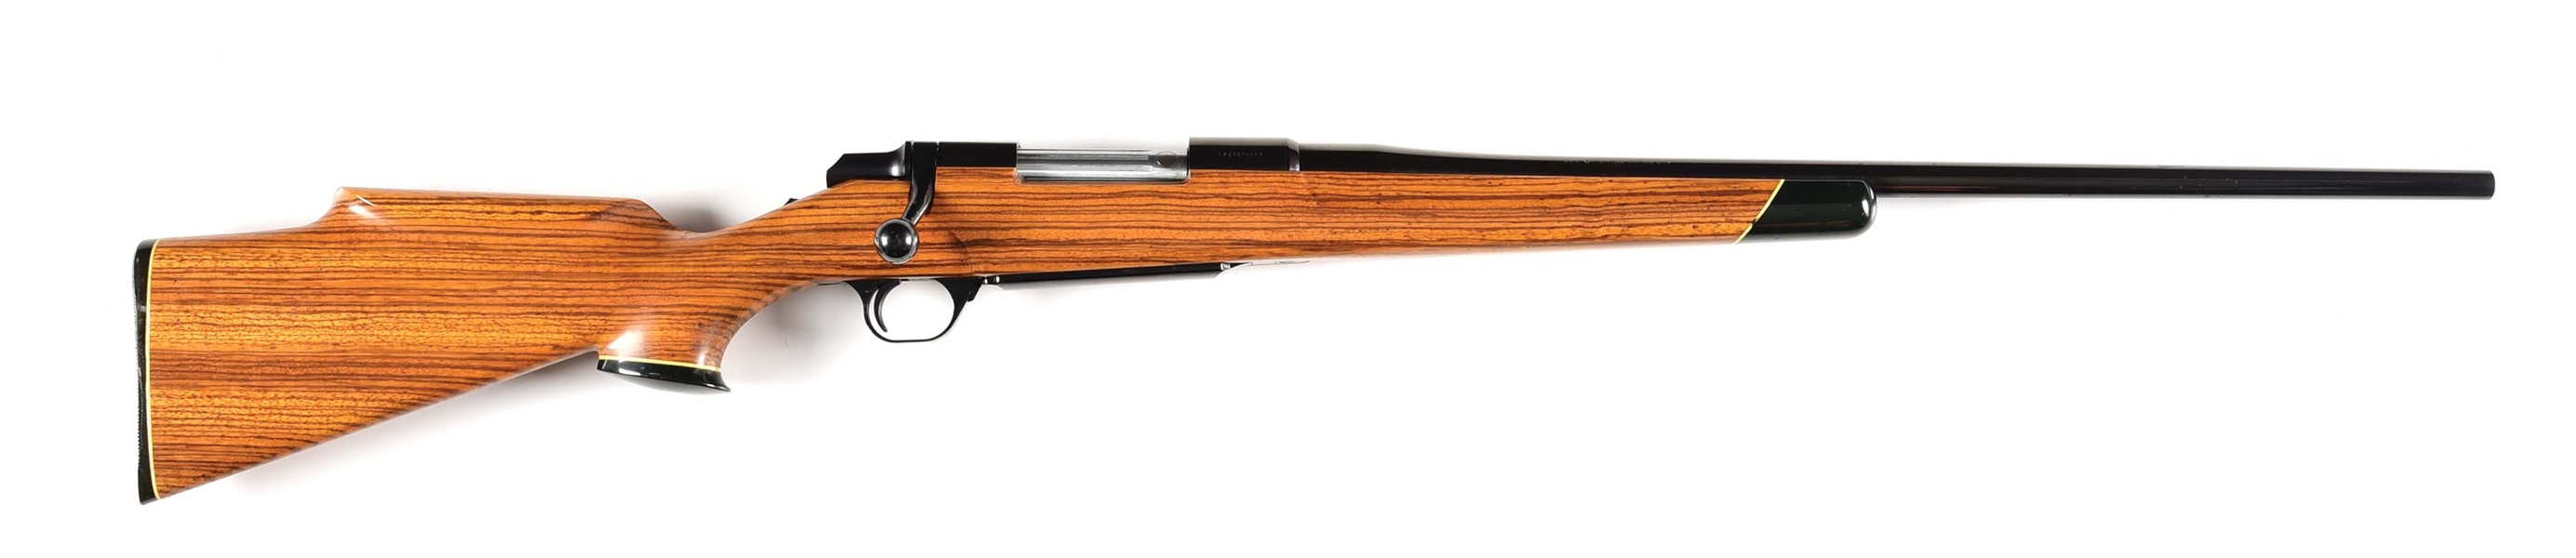 (M) ZEBRA WOOD (MICROBERLINA BRAZZAVILLENSIS) STOCKED BROWNING BBR BOLT ACTION RIFLE.